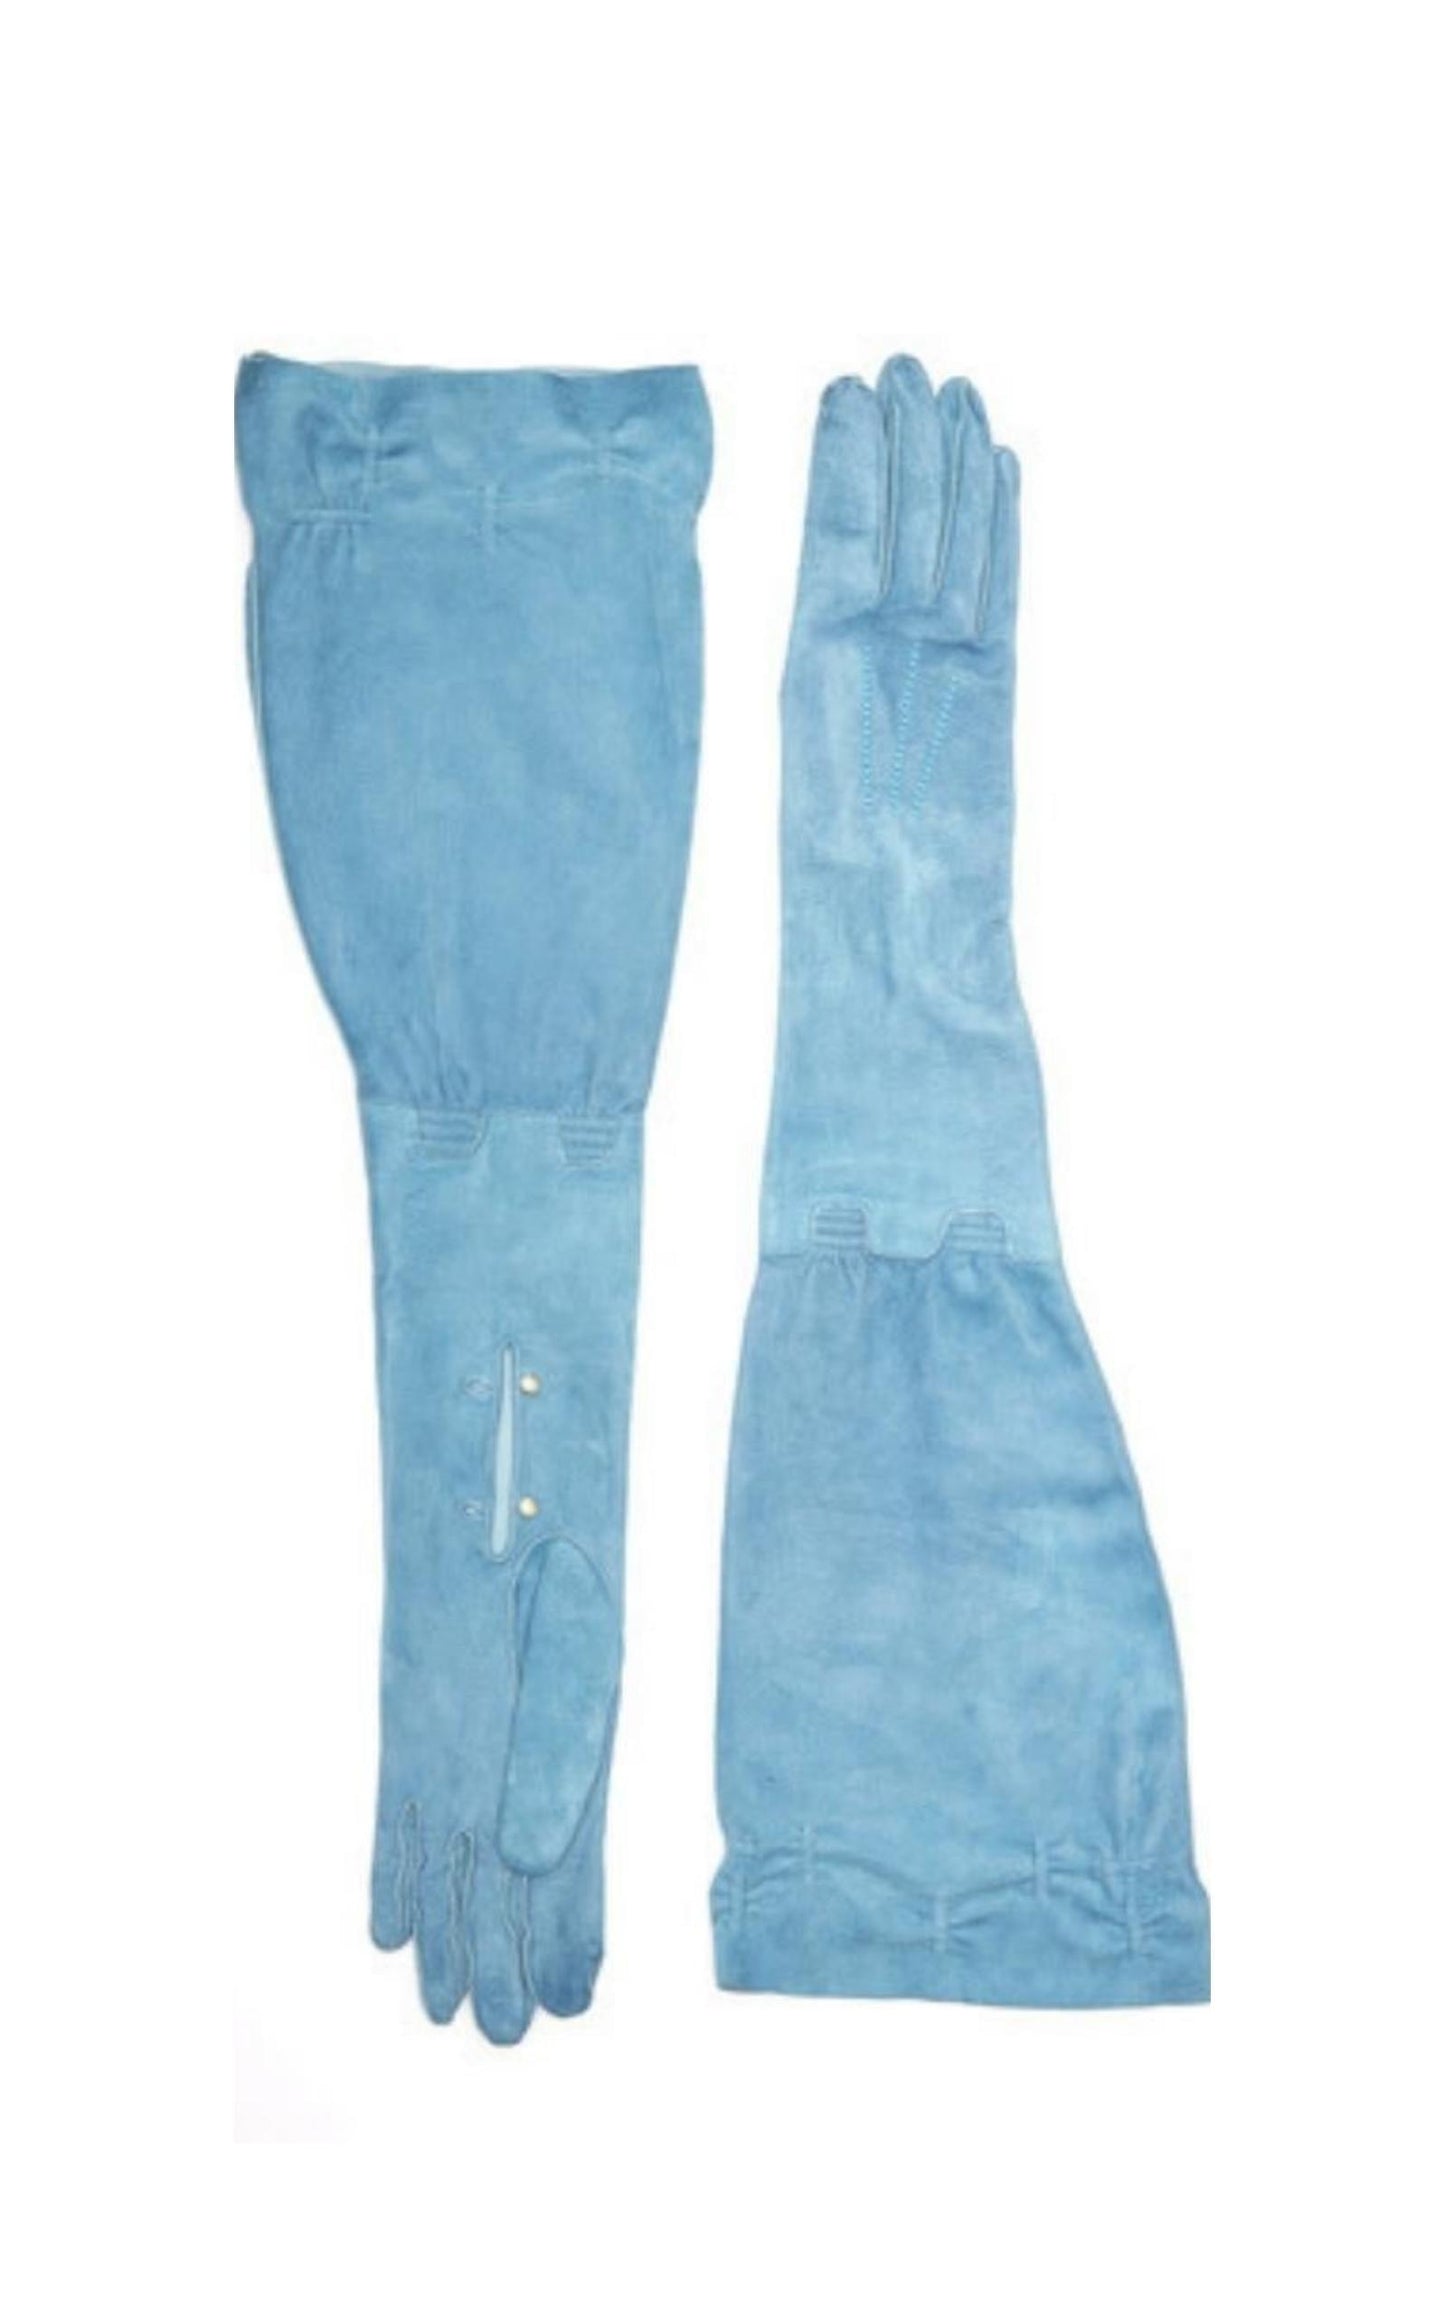  GucciBlue Suede Gloves with Giglio - Runway Catalog